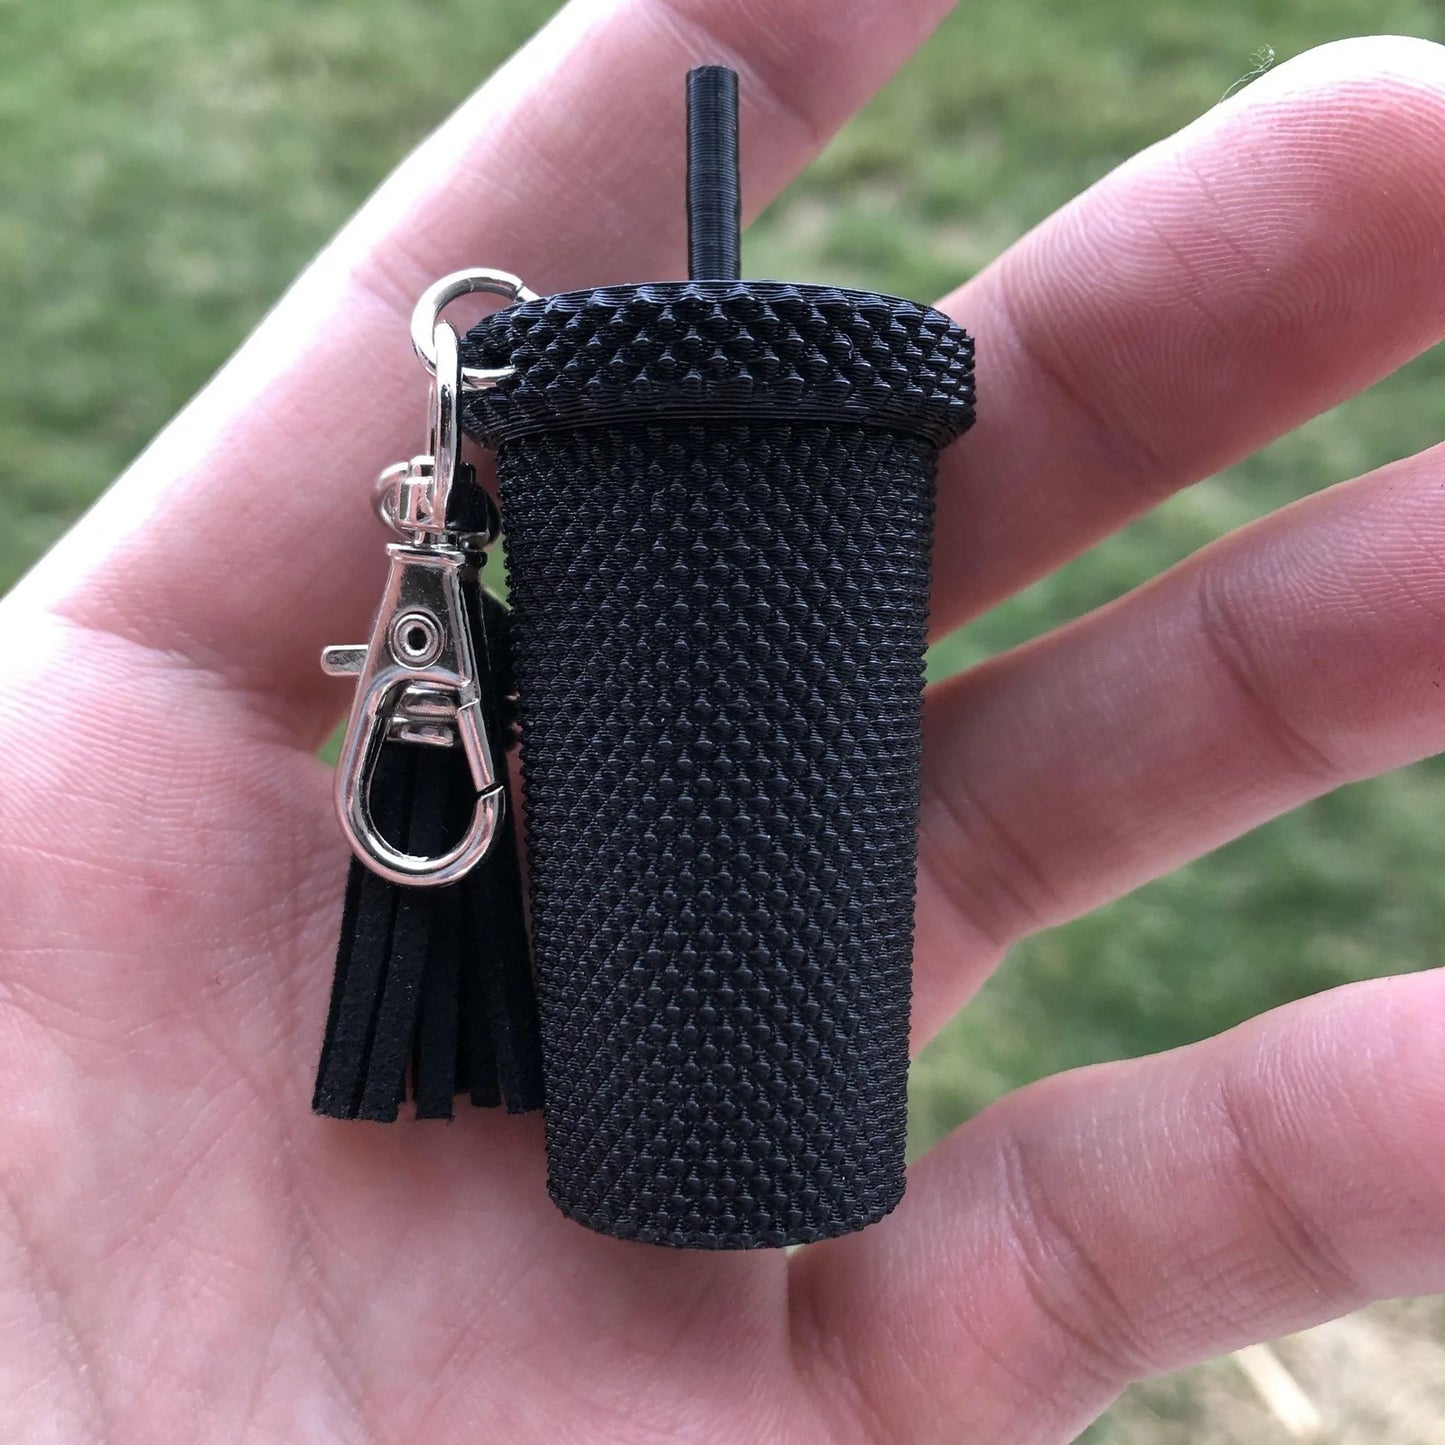 3D Printed Iced Coffee Studded Tumbler Keychain with Charm